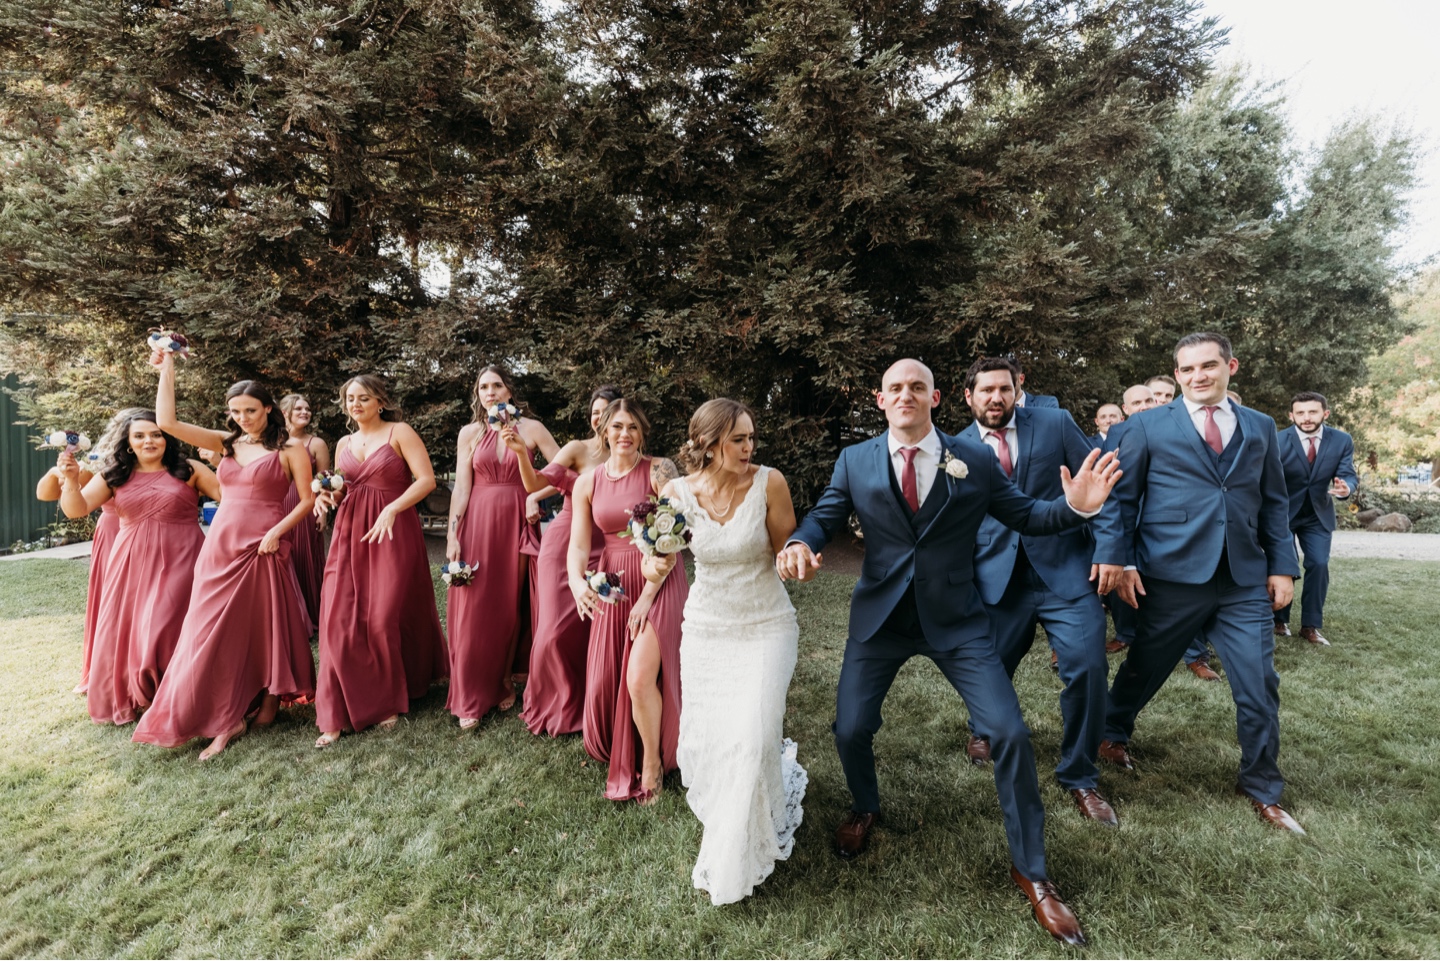 Bride and groom dance with the bridal party before their wedding at Julietta winery in Sacramento, California.. Wedding photography in Sacramento by Liz Koston.